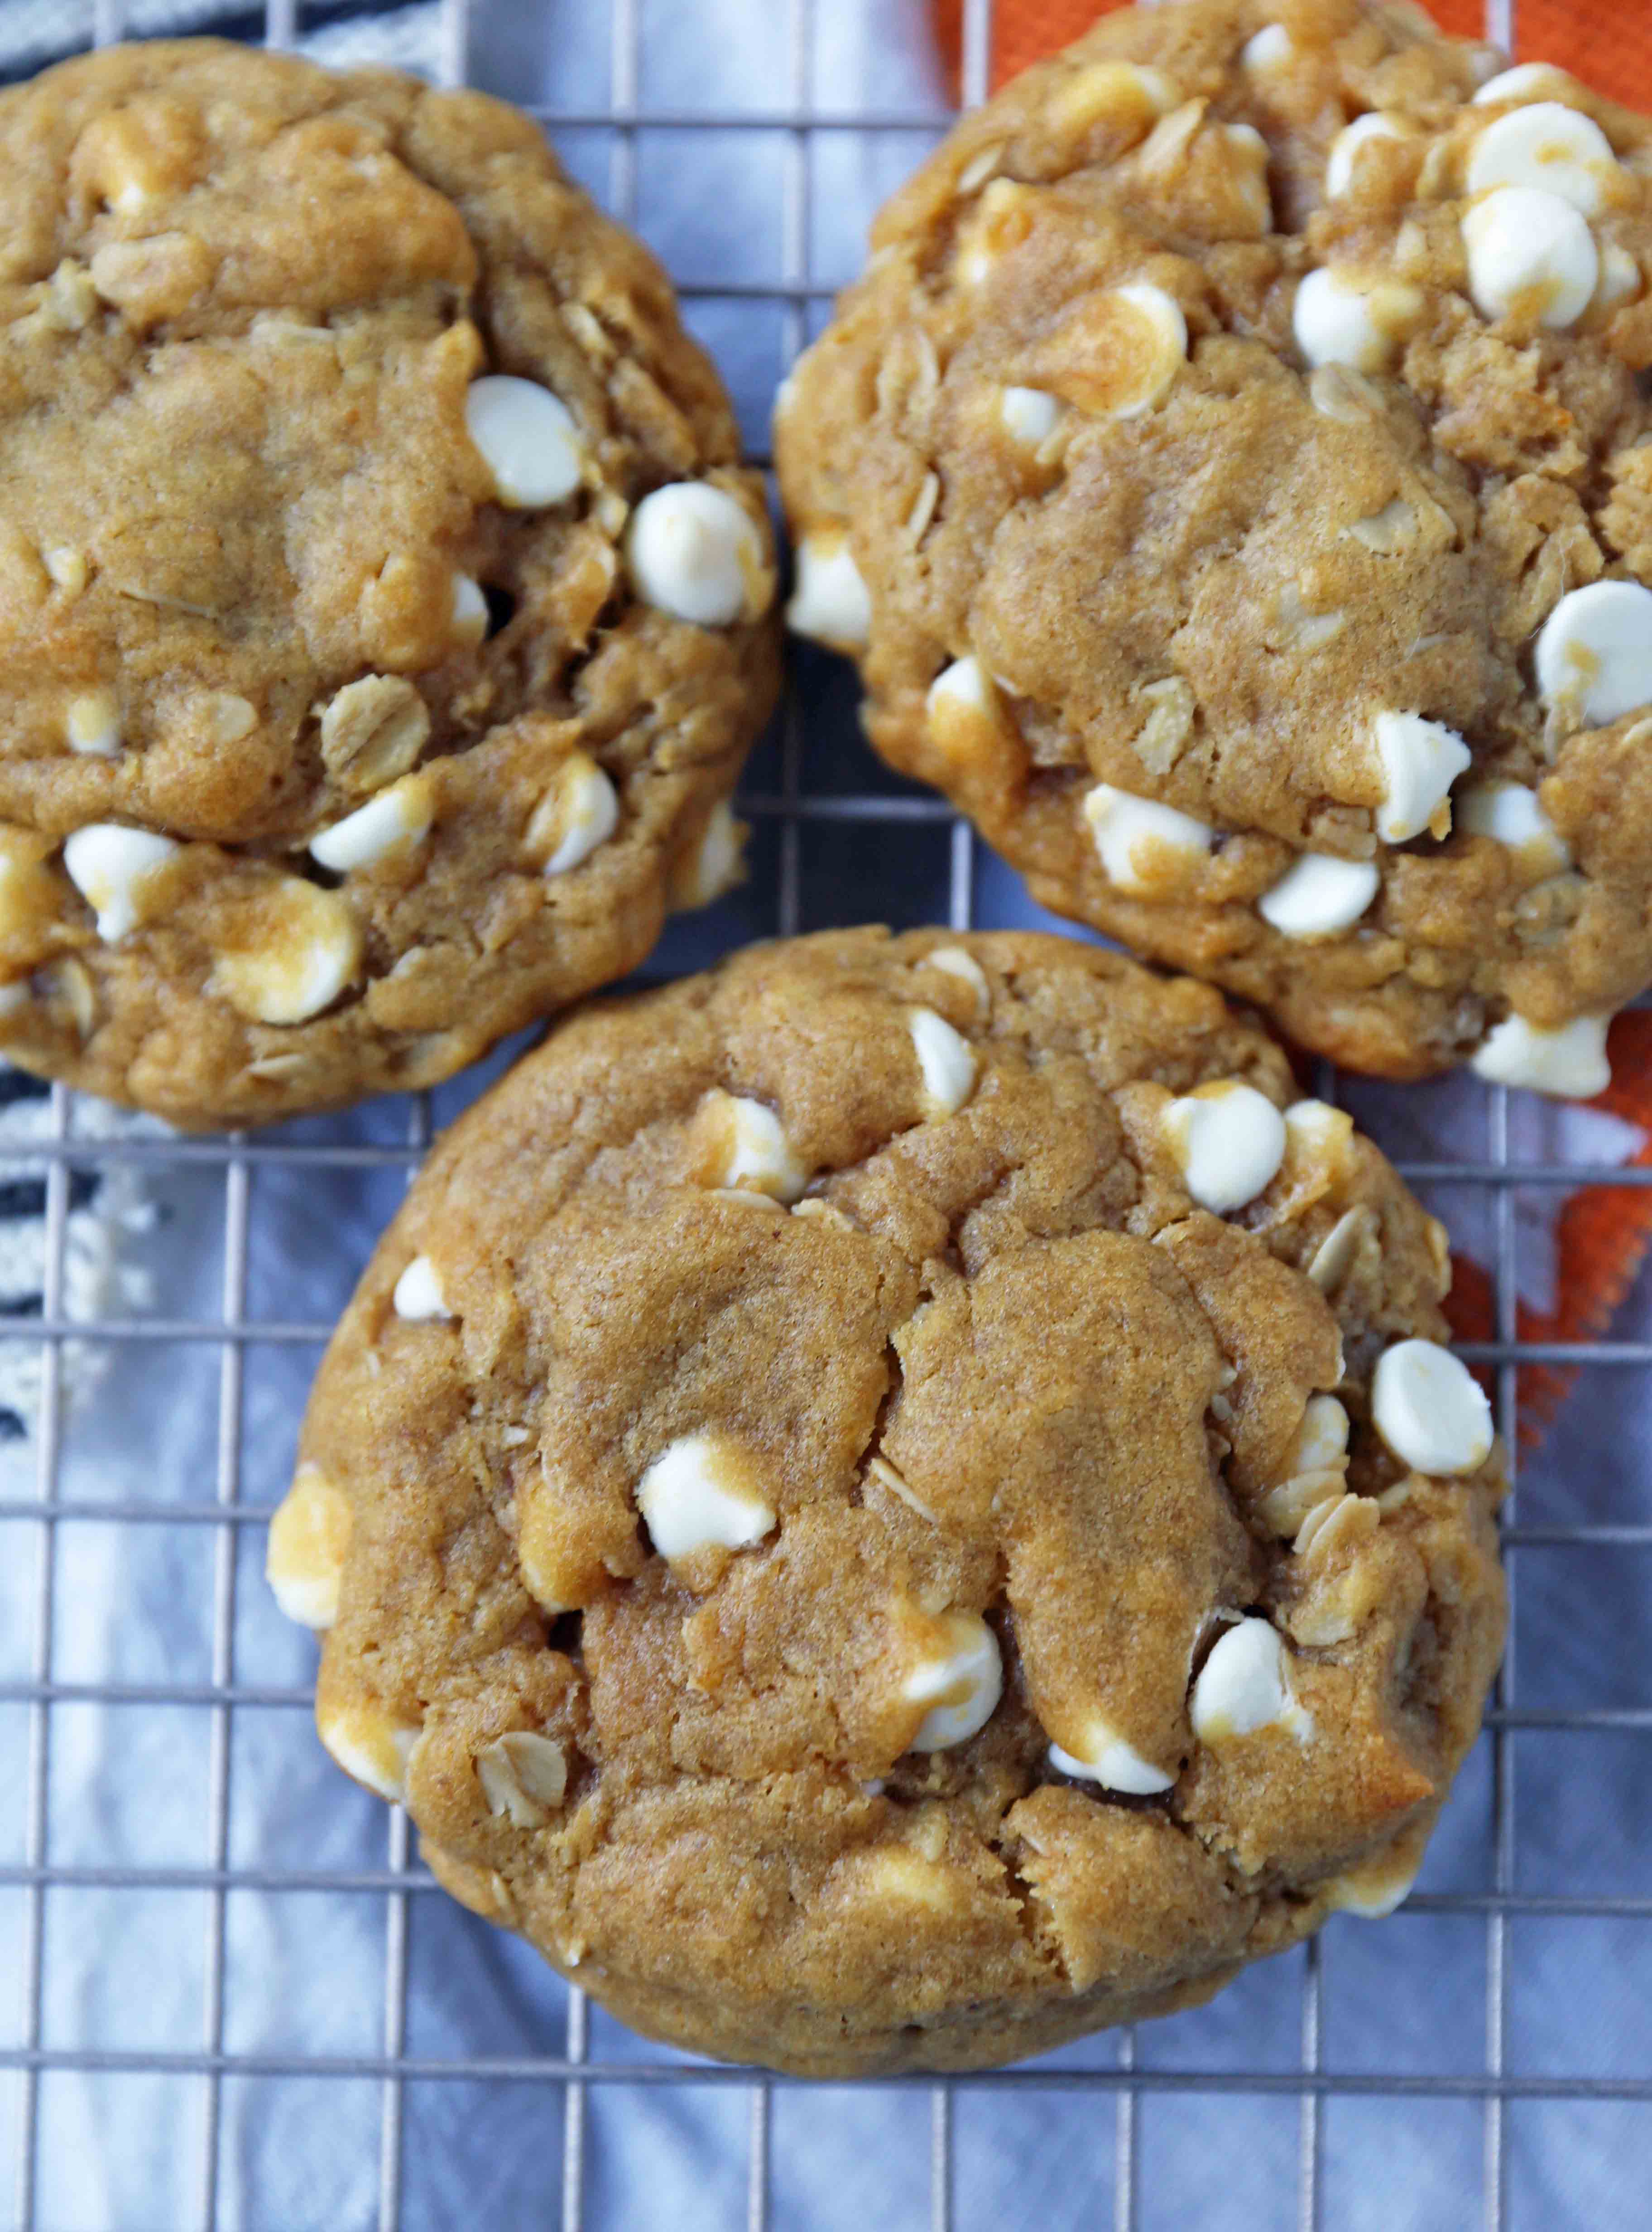 Pumpkin White Chocolate Chip Cookies Recipe. Soft and Chewy Pumpkin Oatmeal Cookies with White Chocolate Chips. The best chewy pumpkin cookies. www.modernhoney.com #pumpkincookies #pumpkinoatmealcookies #pumpkinwhitechocolatechipcookies #fallrecipes 